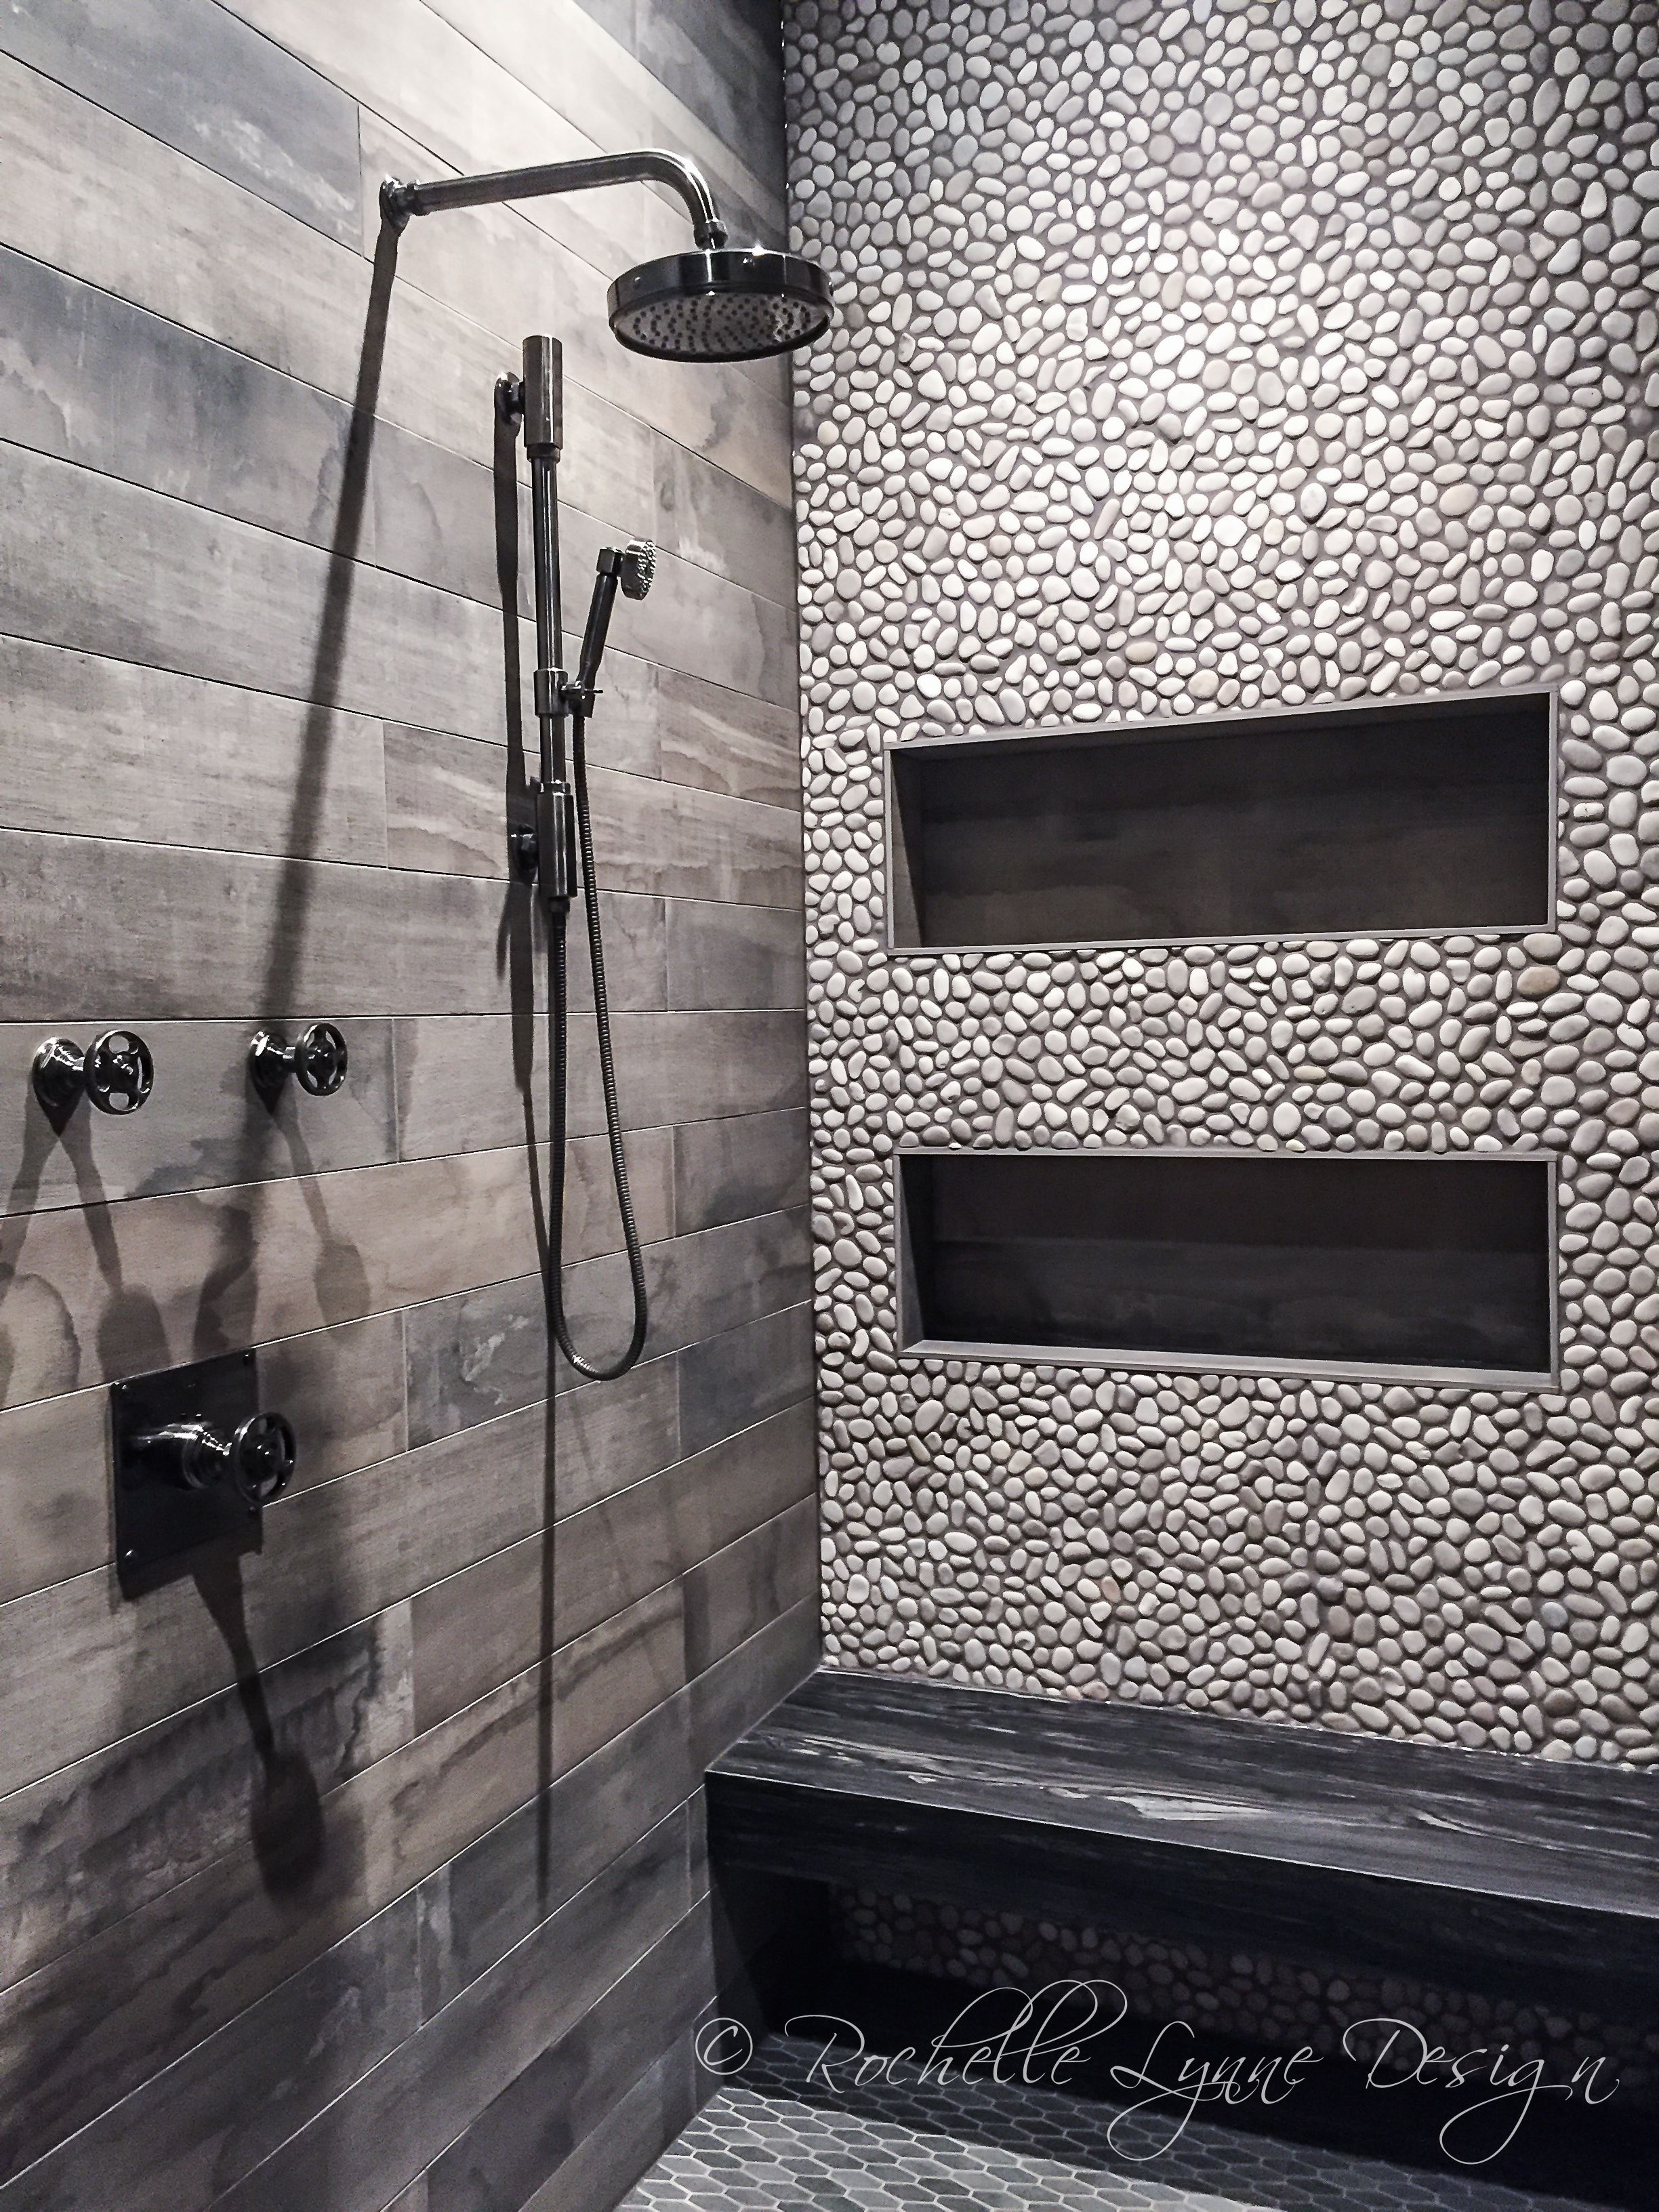 Wood look tile and pebbles in shower, bench seat of stone, large ...